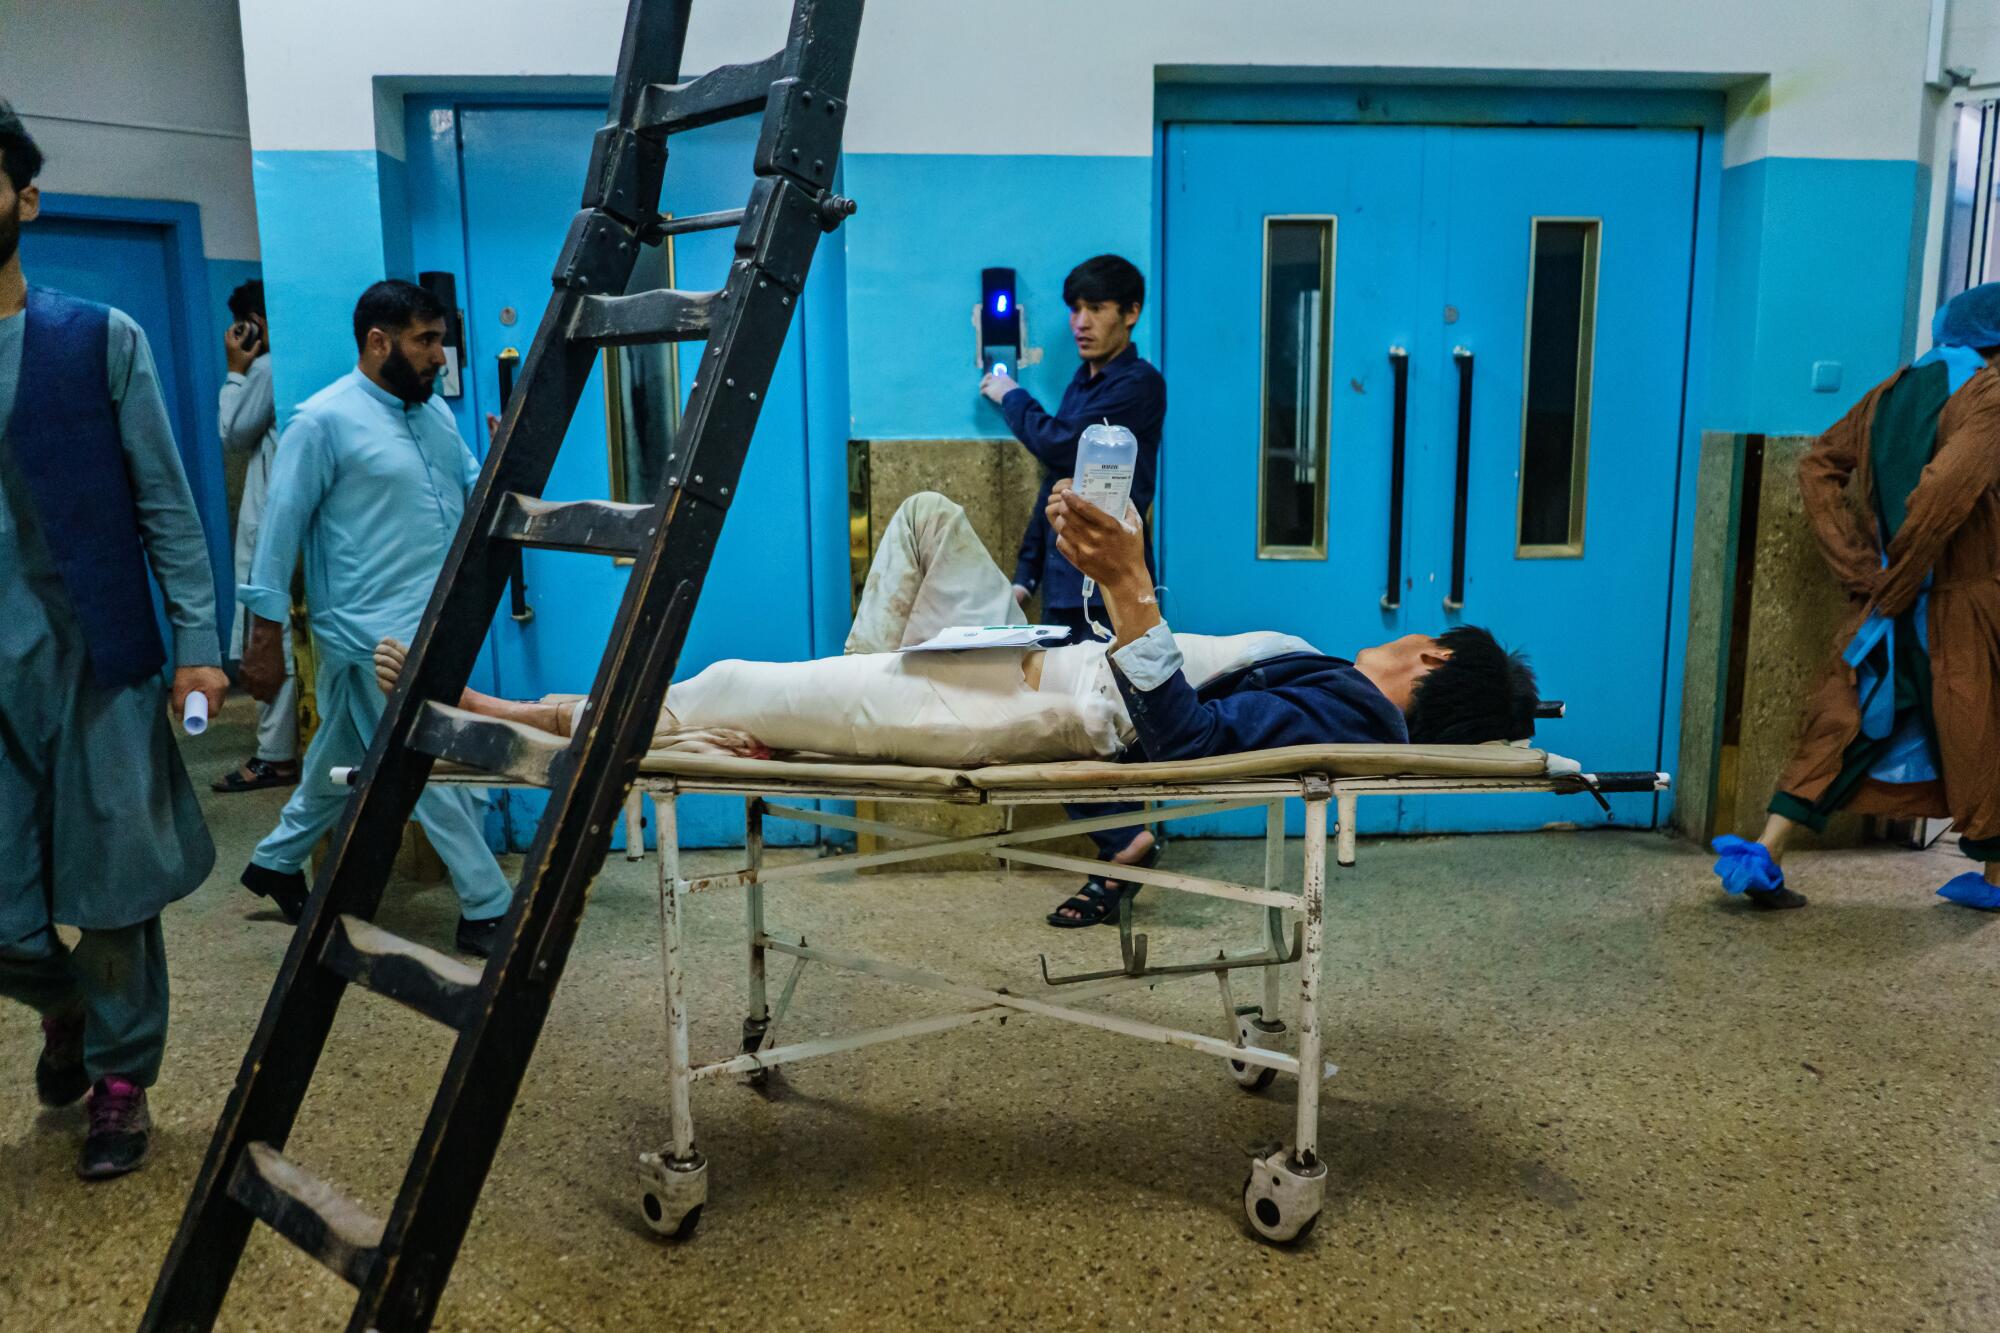 A wounded patient lies on a gurney in the hallway 